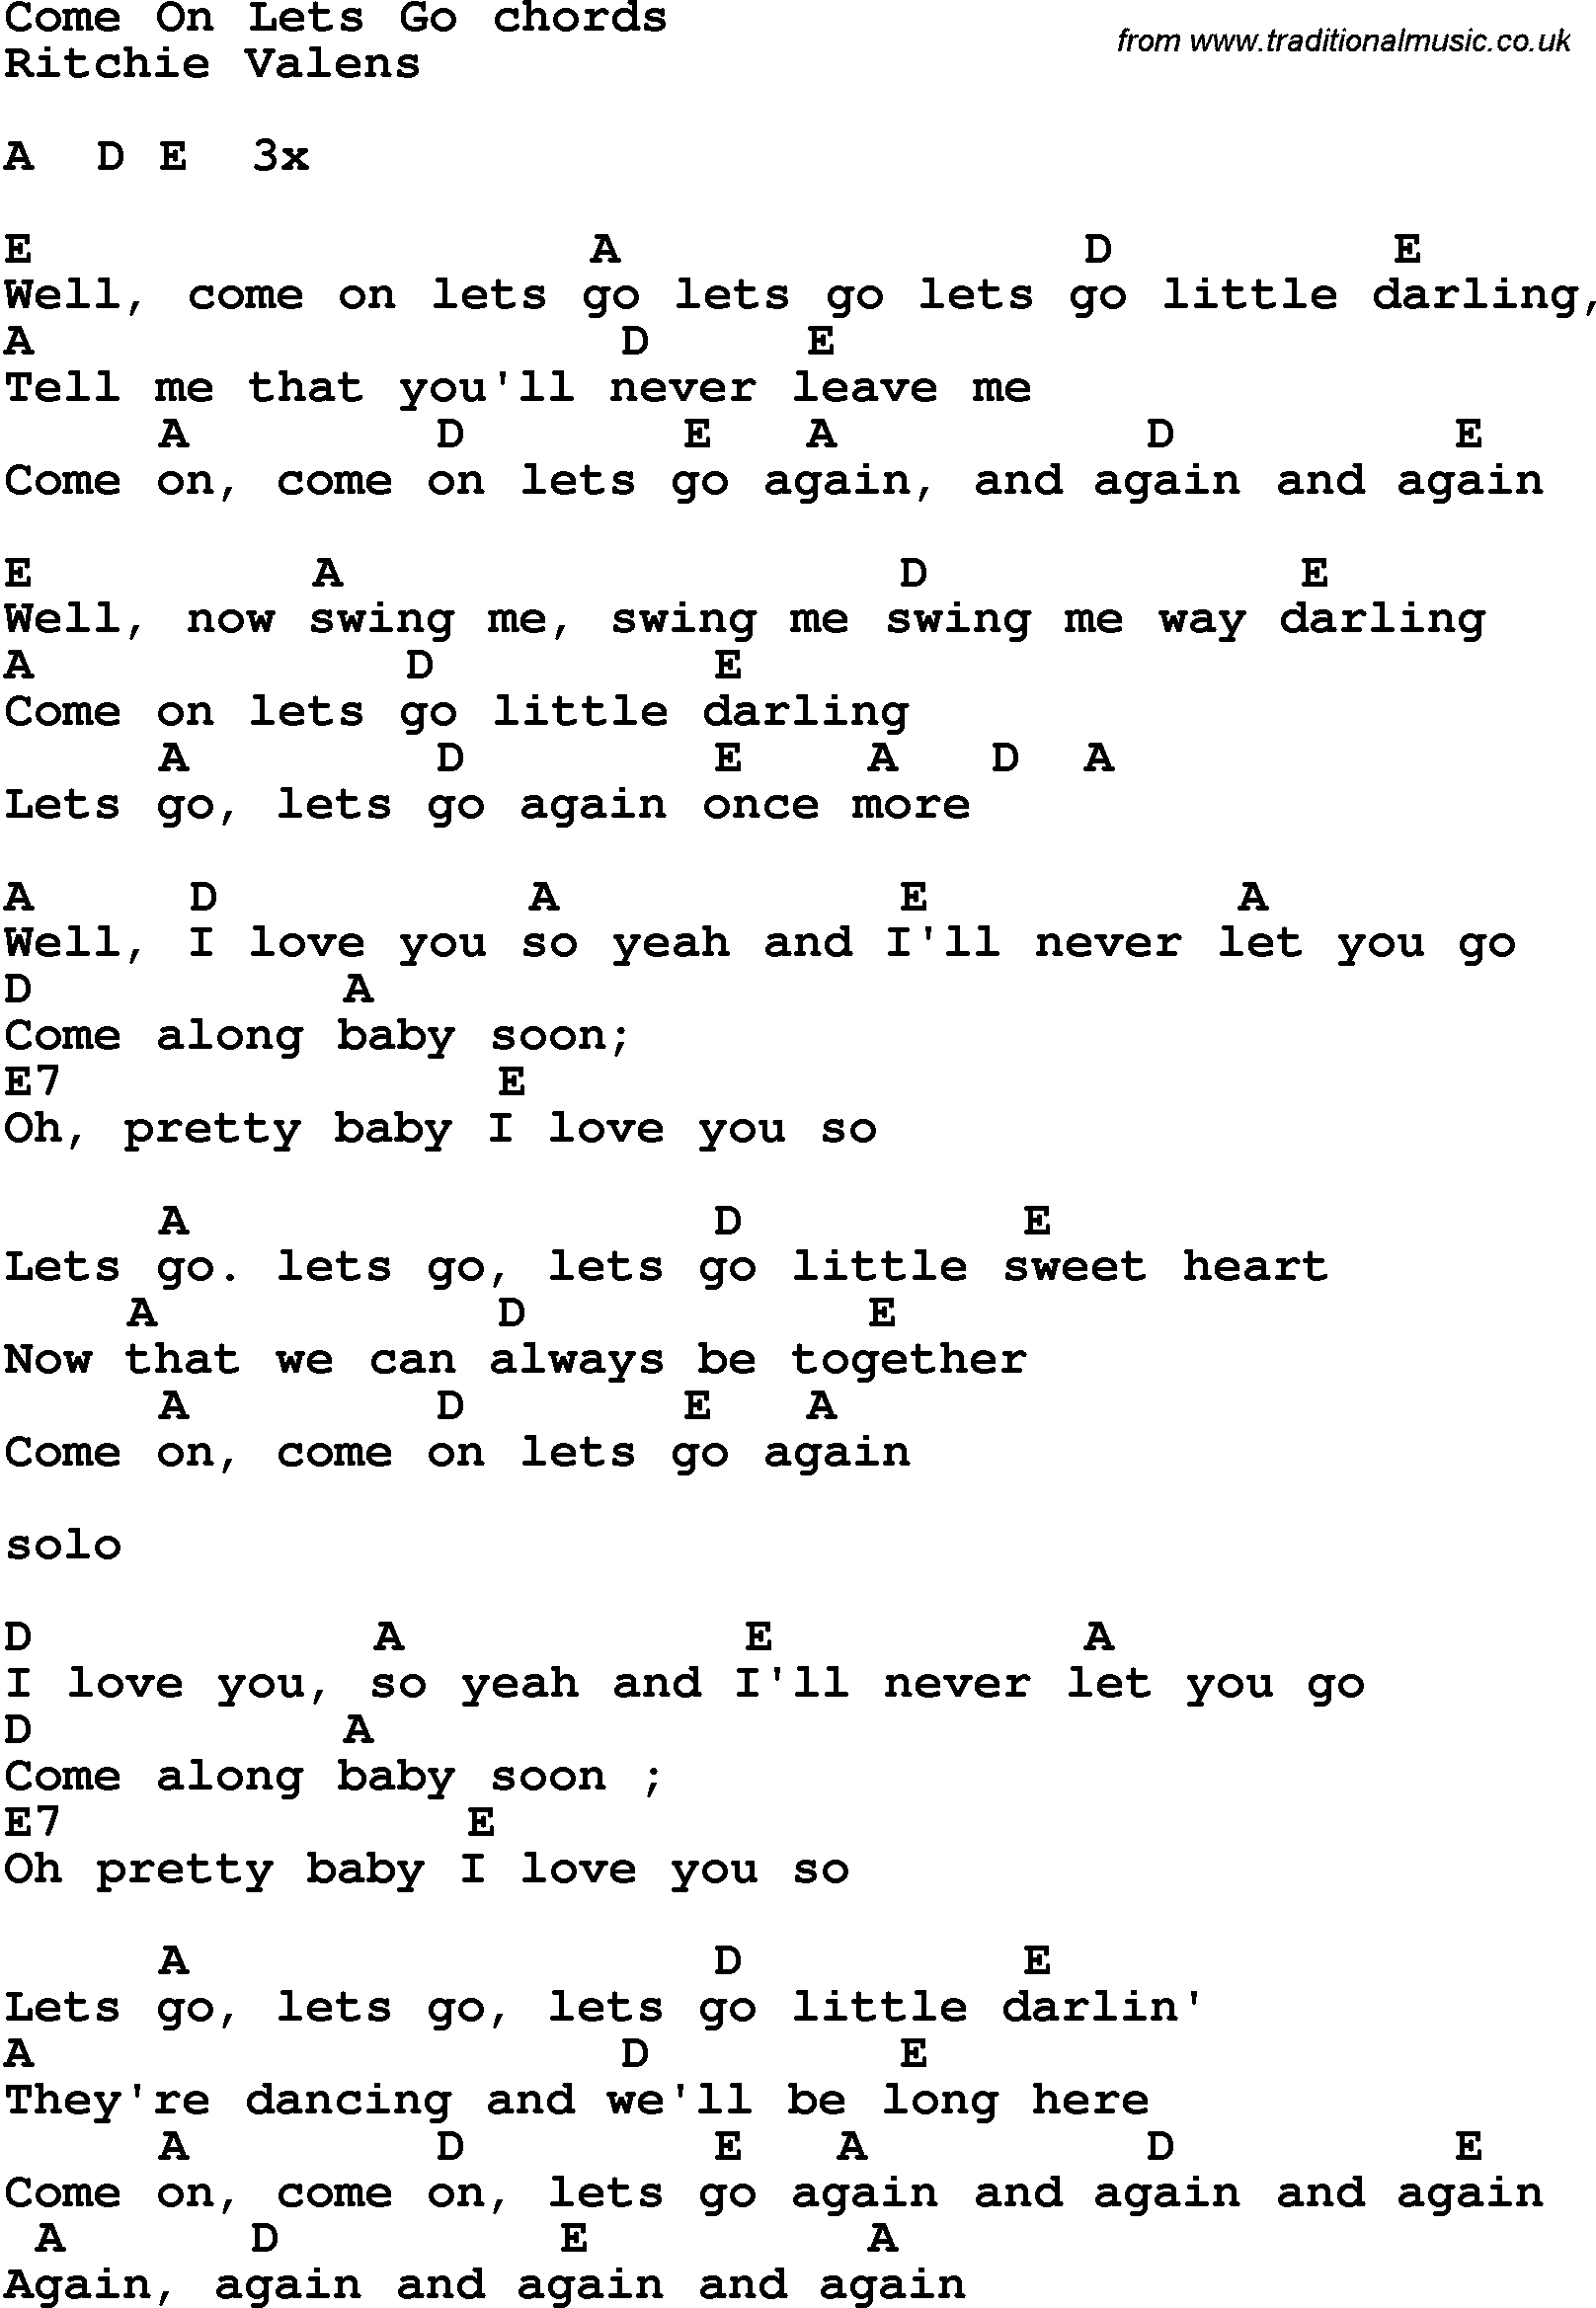 Let It Go Chords Song Lyrics With Guitar Chords For Come On Lets Go